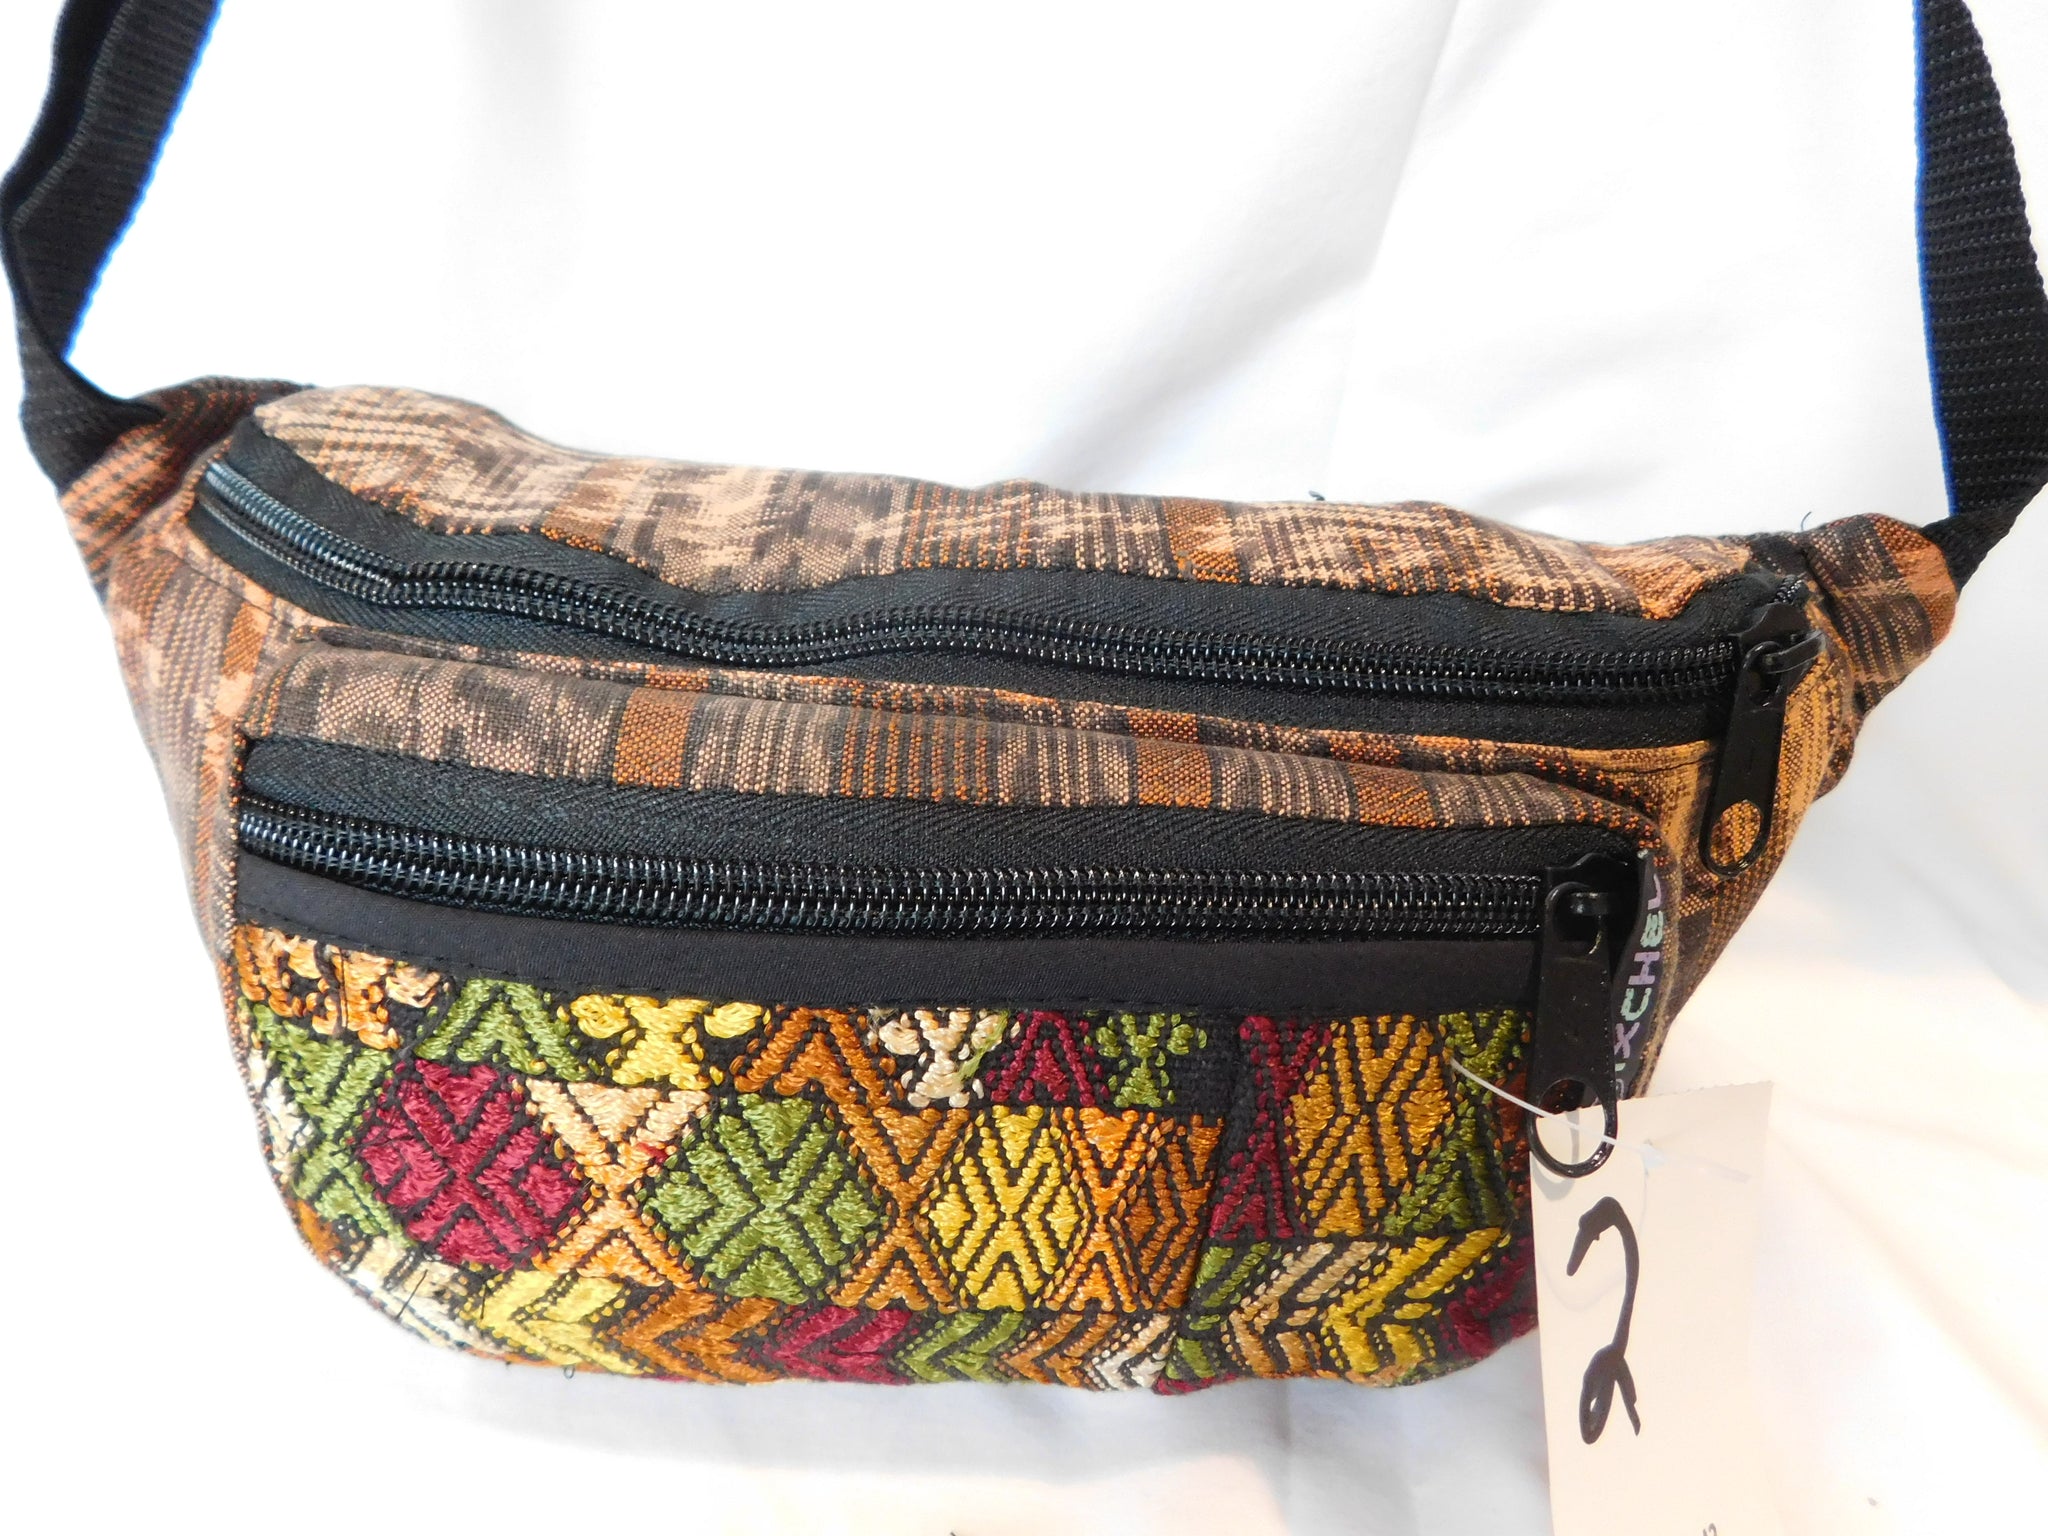 Extra large 3 pocket waist pack in hand woven cotton.